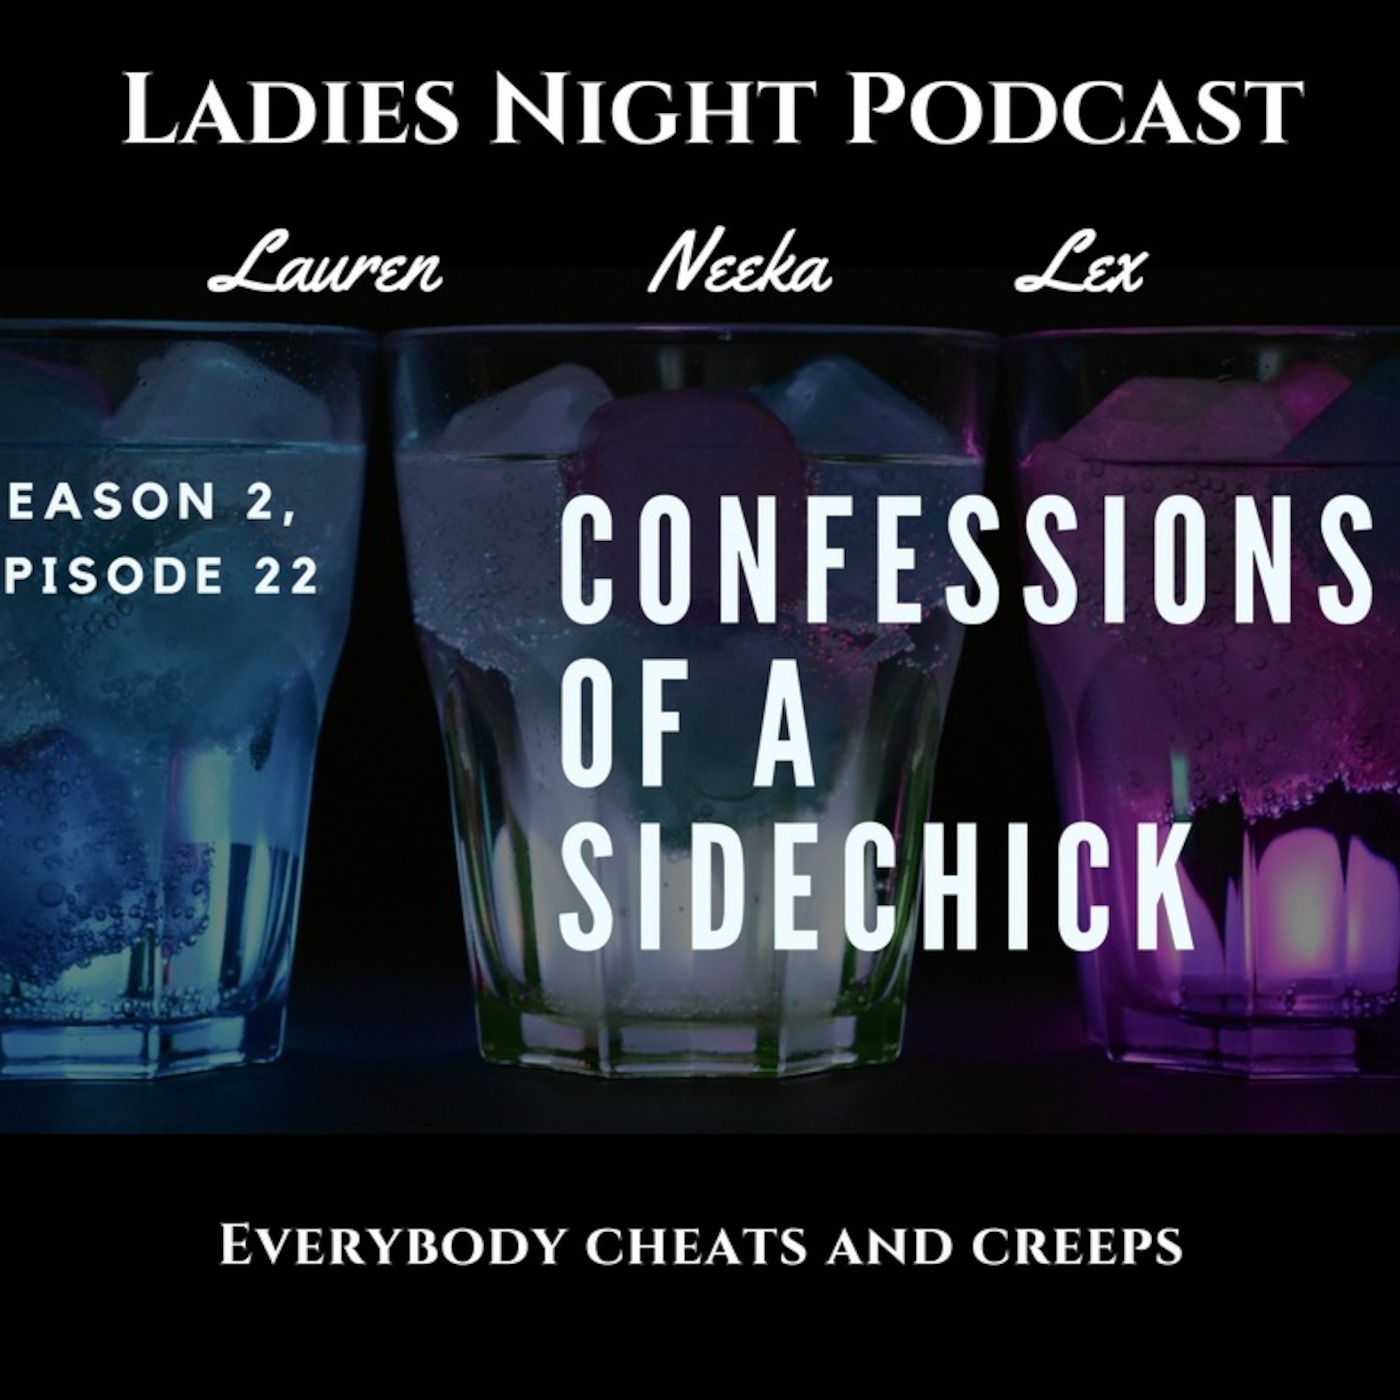 Ladies Night Season 2 Episode 22 - Confessions of a Side Chick